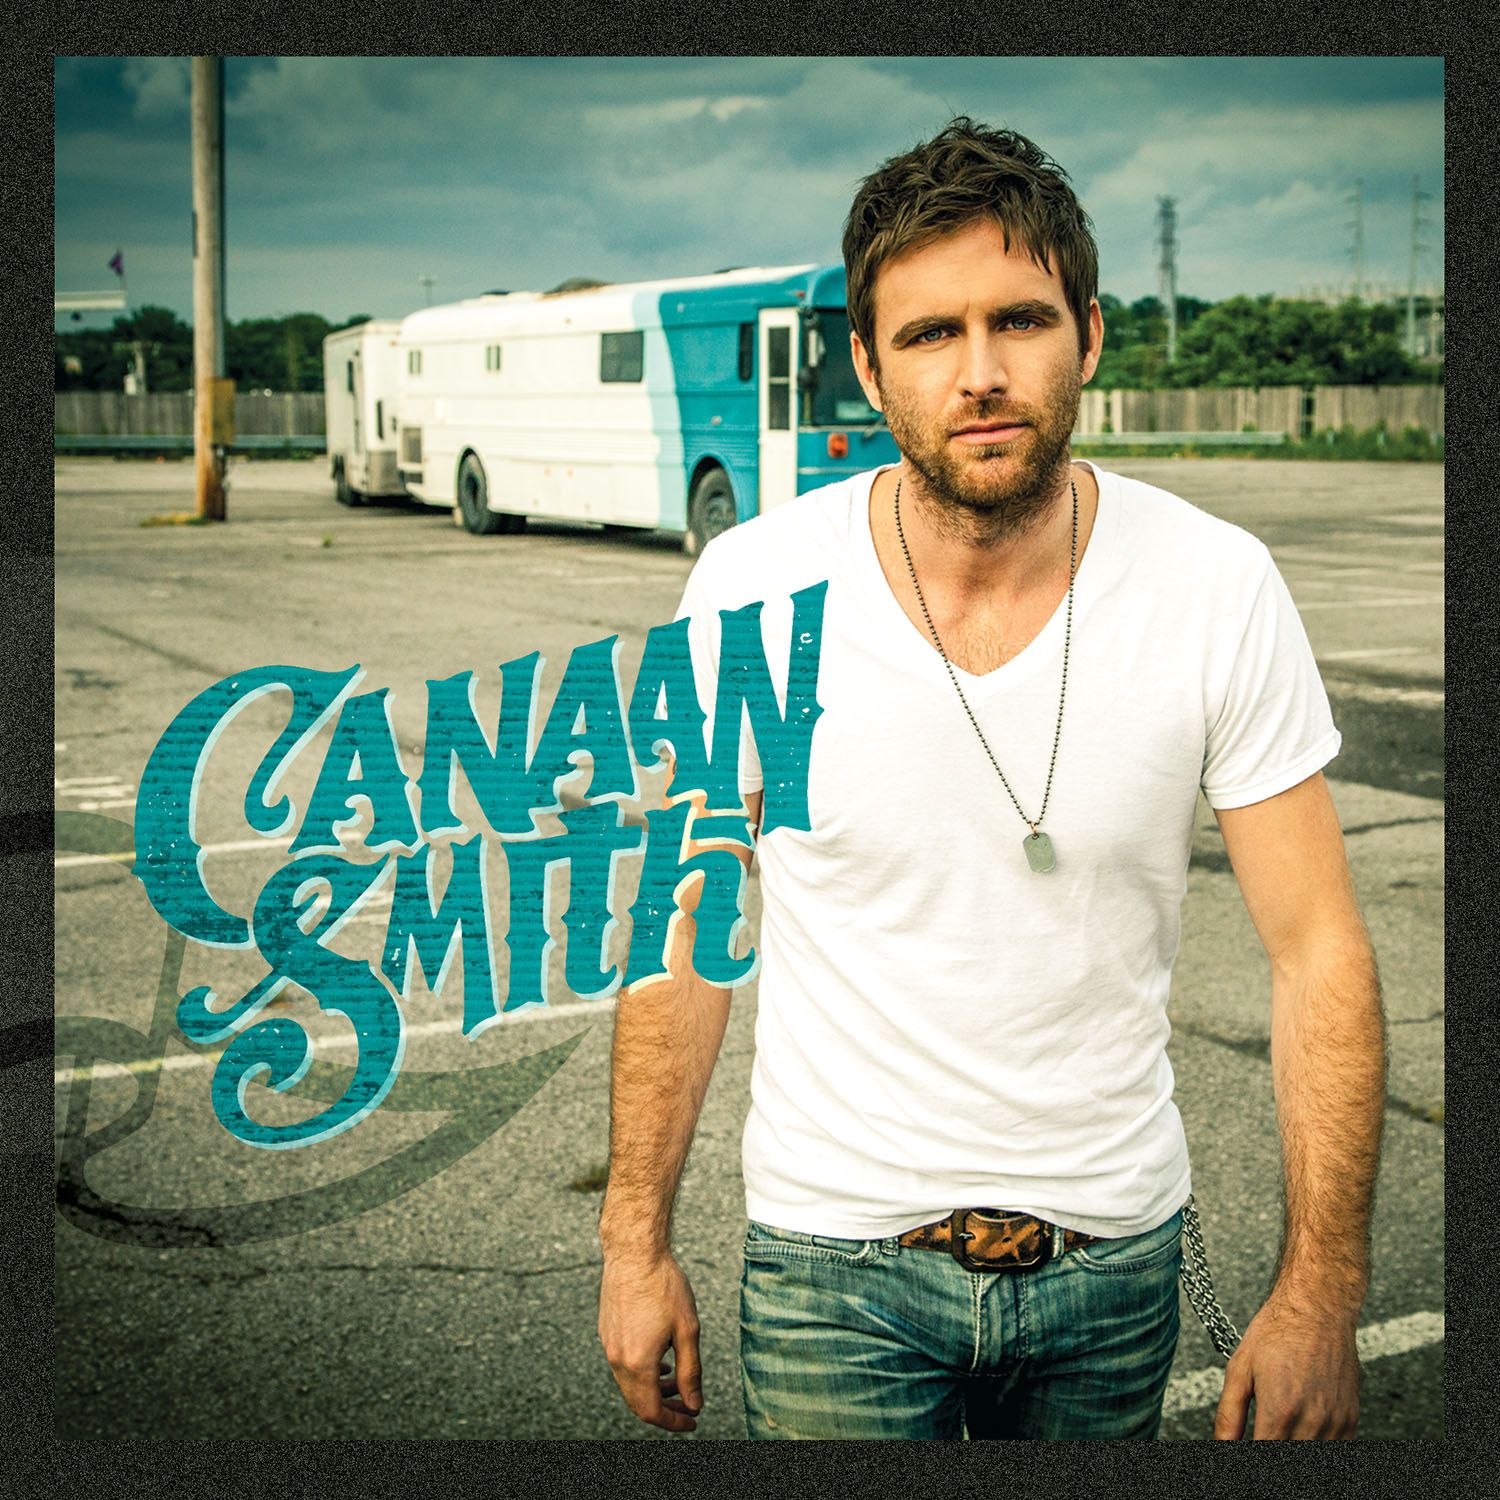 CANAAN SMITH TO RELEASE DEBUT EP 3/24